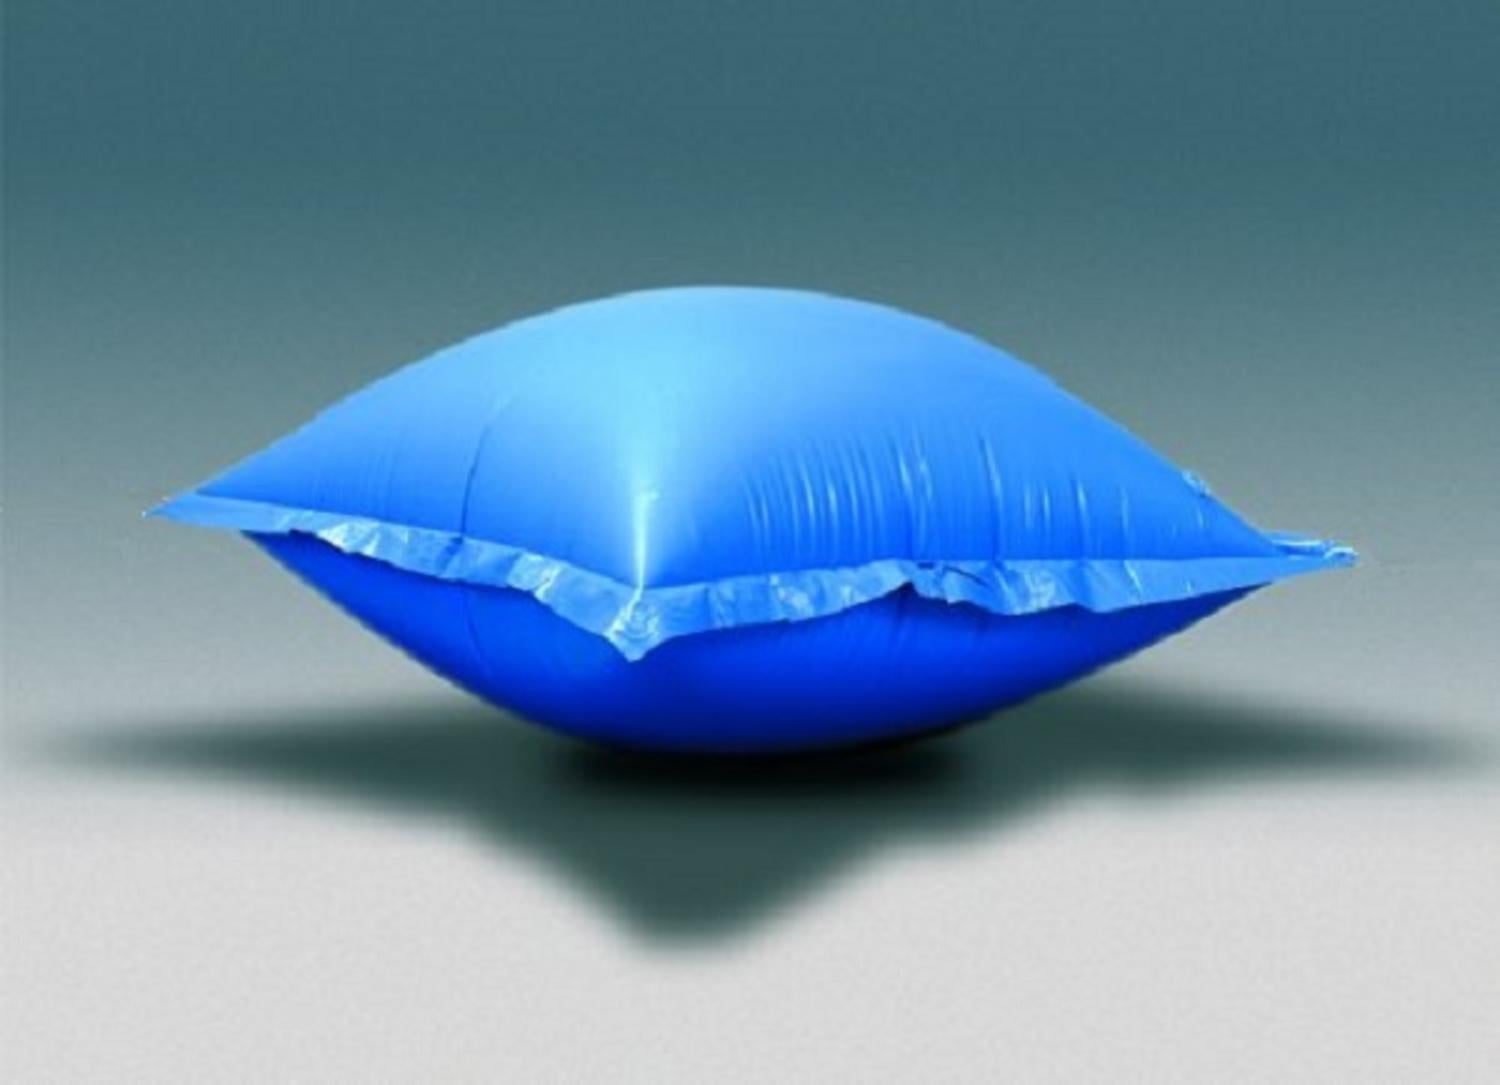 air pillow for above ground pool